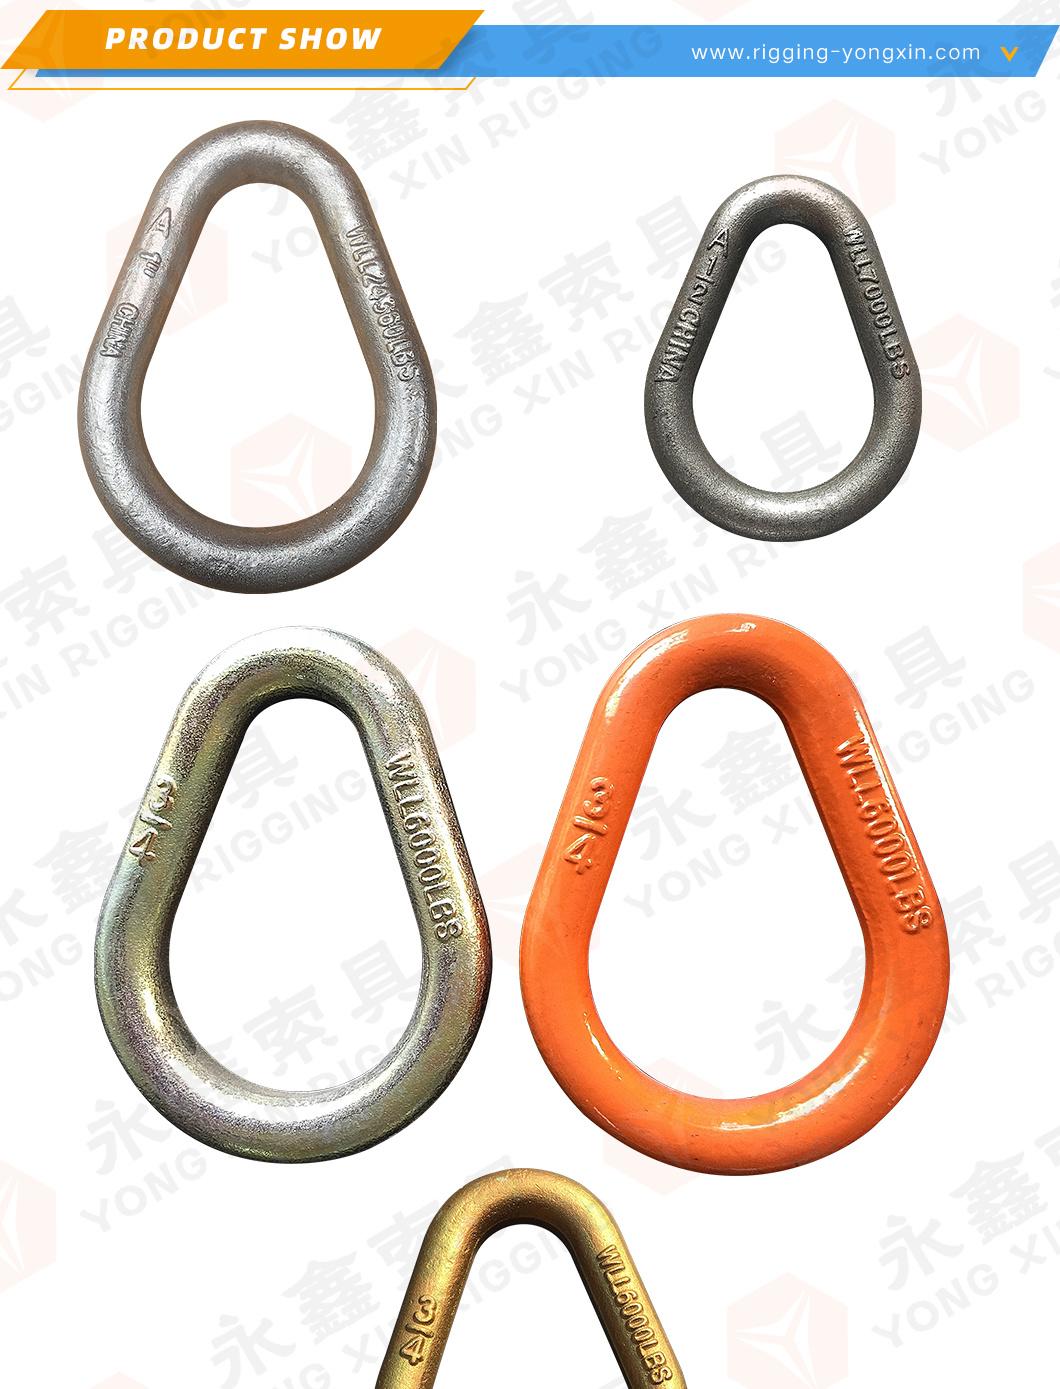 Drop Forged Alloy Steel Pear Shaped Link